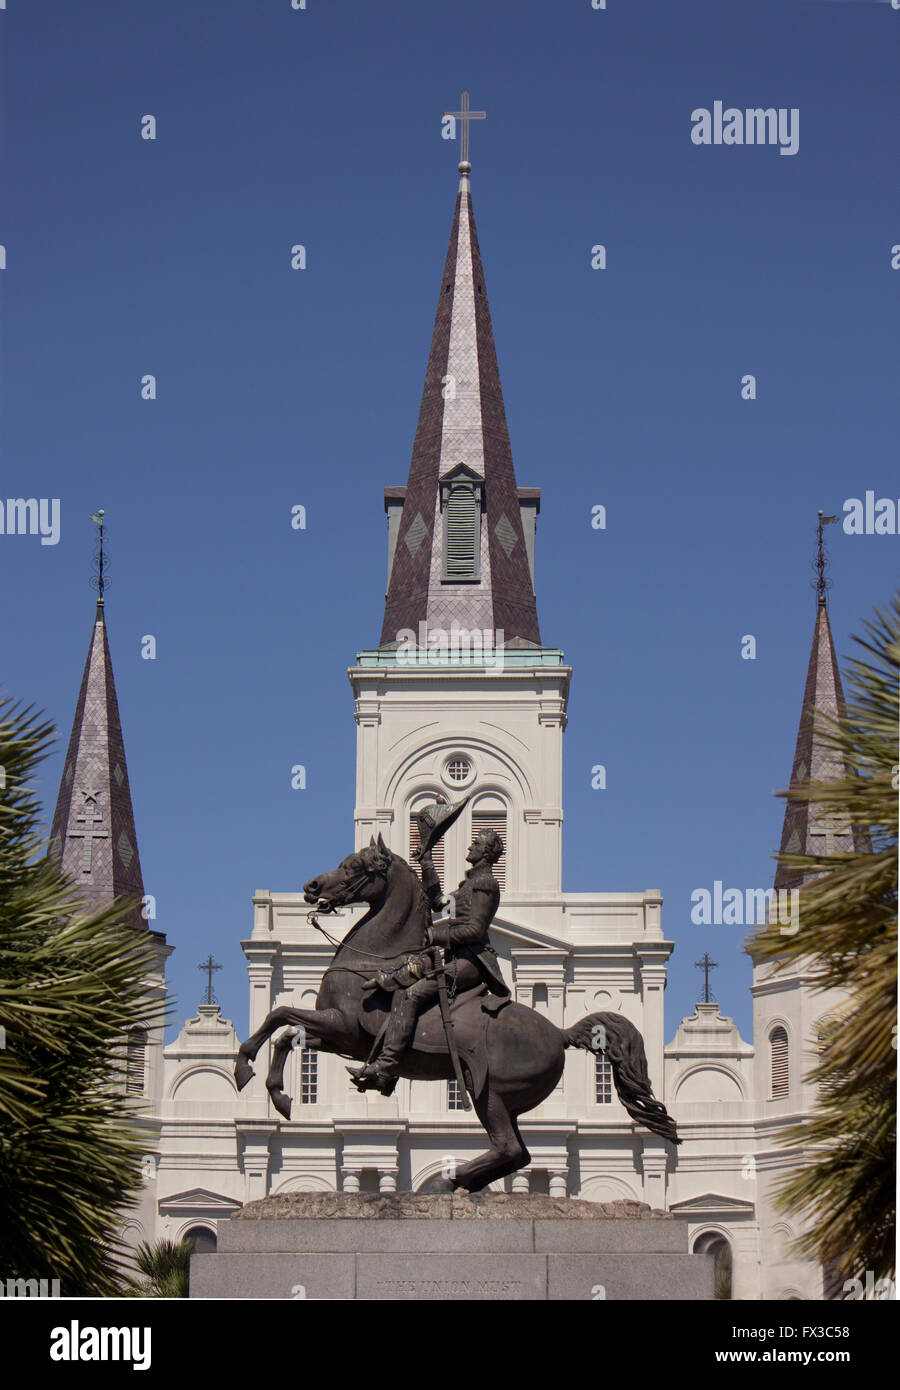 St. Lois cathedral spires, with Andrew Jackson sculpture in the foreground.  New Orleans, Jackson Square. Stock Photo